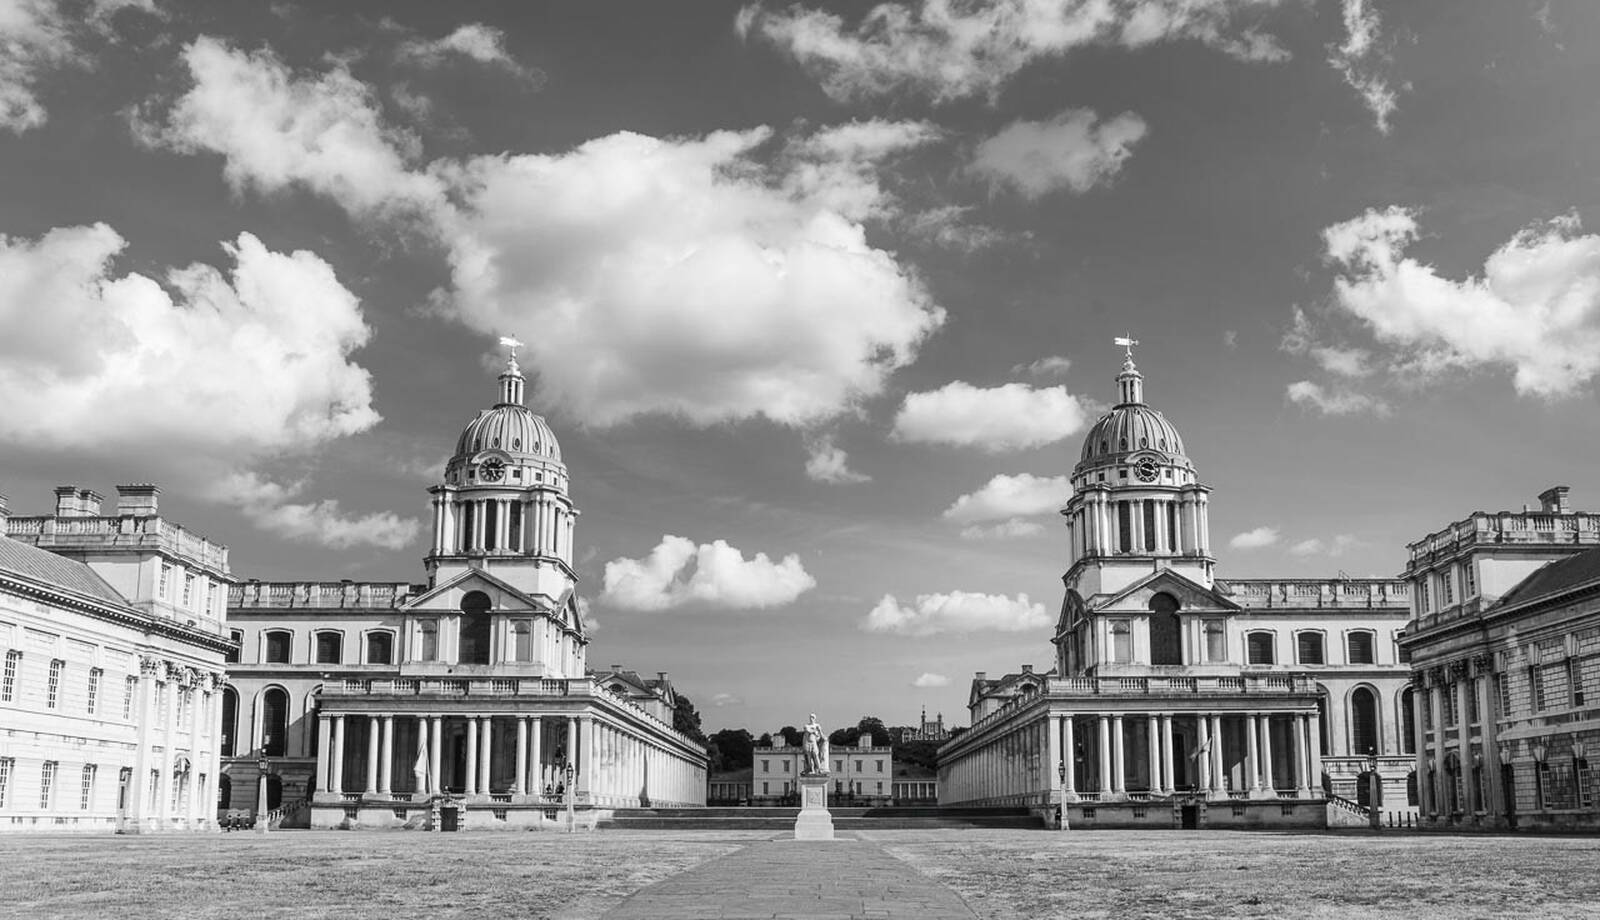 Image of The Old Royal Naval College, Greenwich by michael bennett